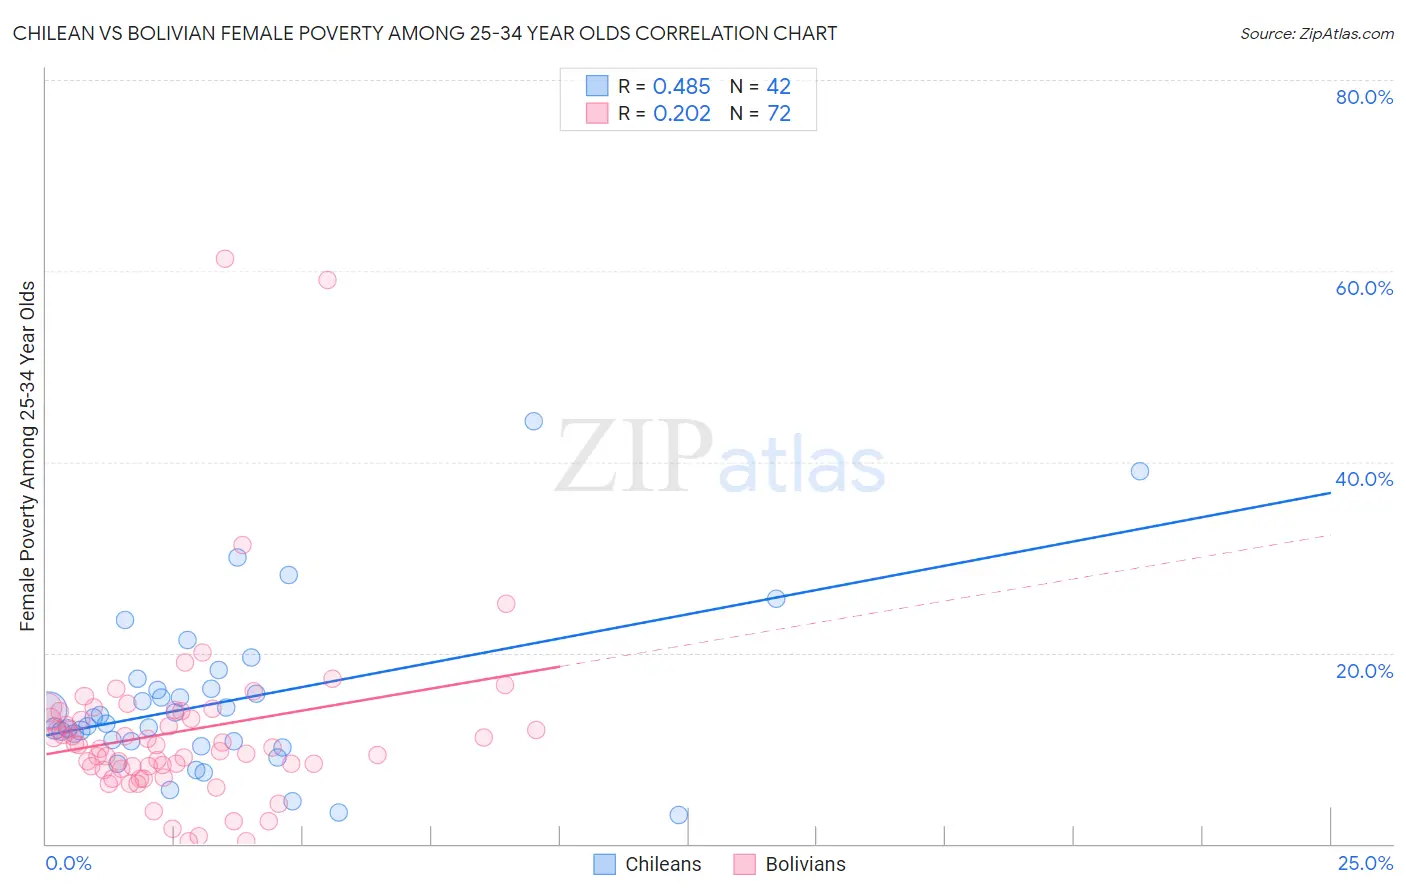 Chilean vs Bolivian Female Poverty Among 25-34 Year Olds